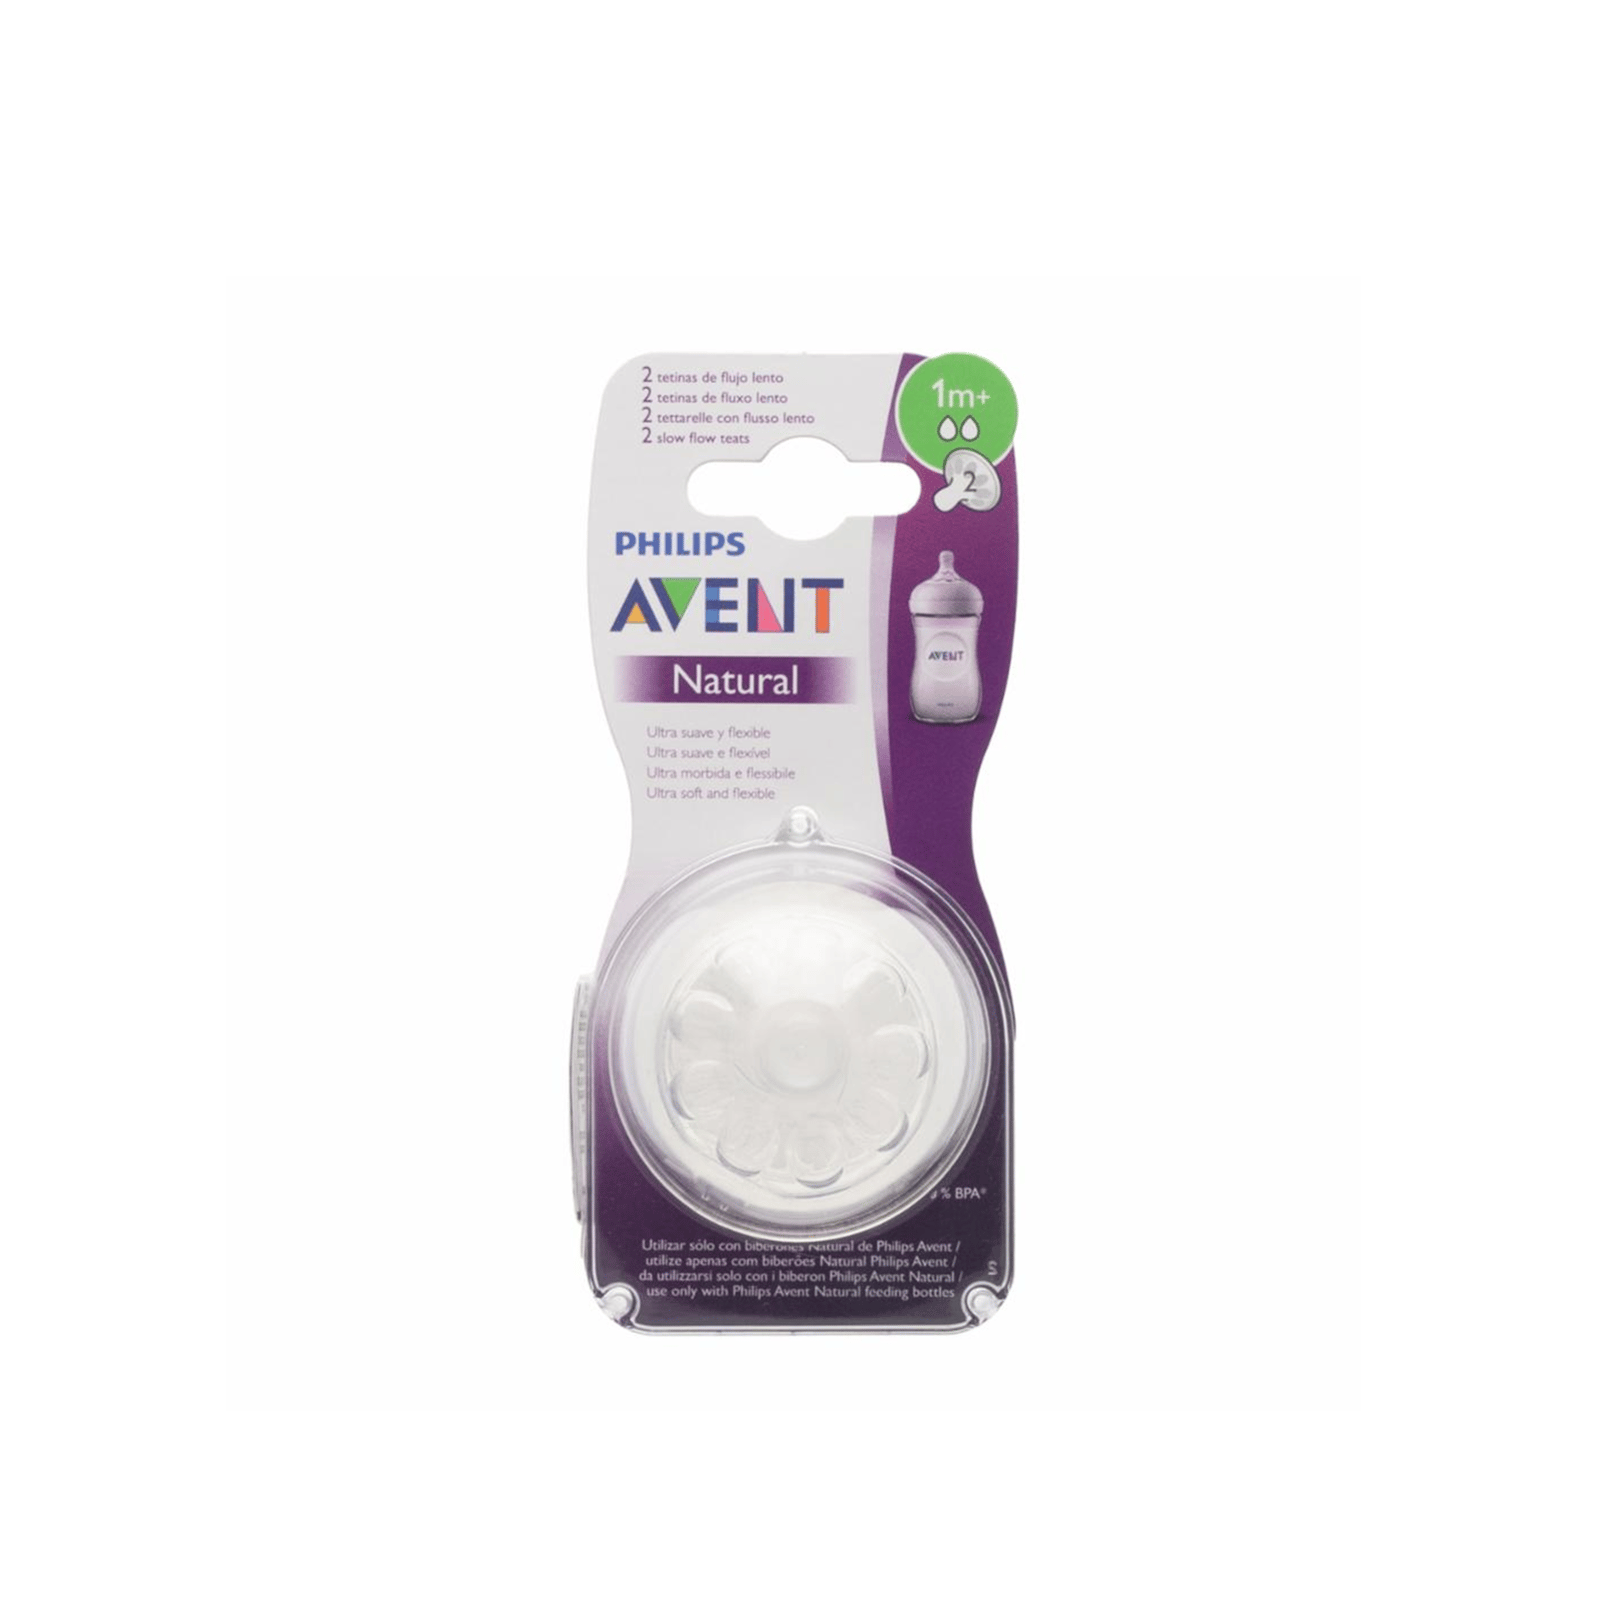 Philips Avent Natural Baby Bottle Nipple Flow 2 1m+ x2